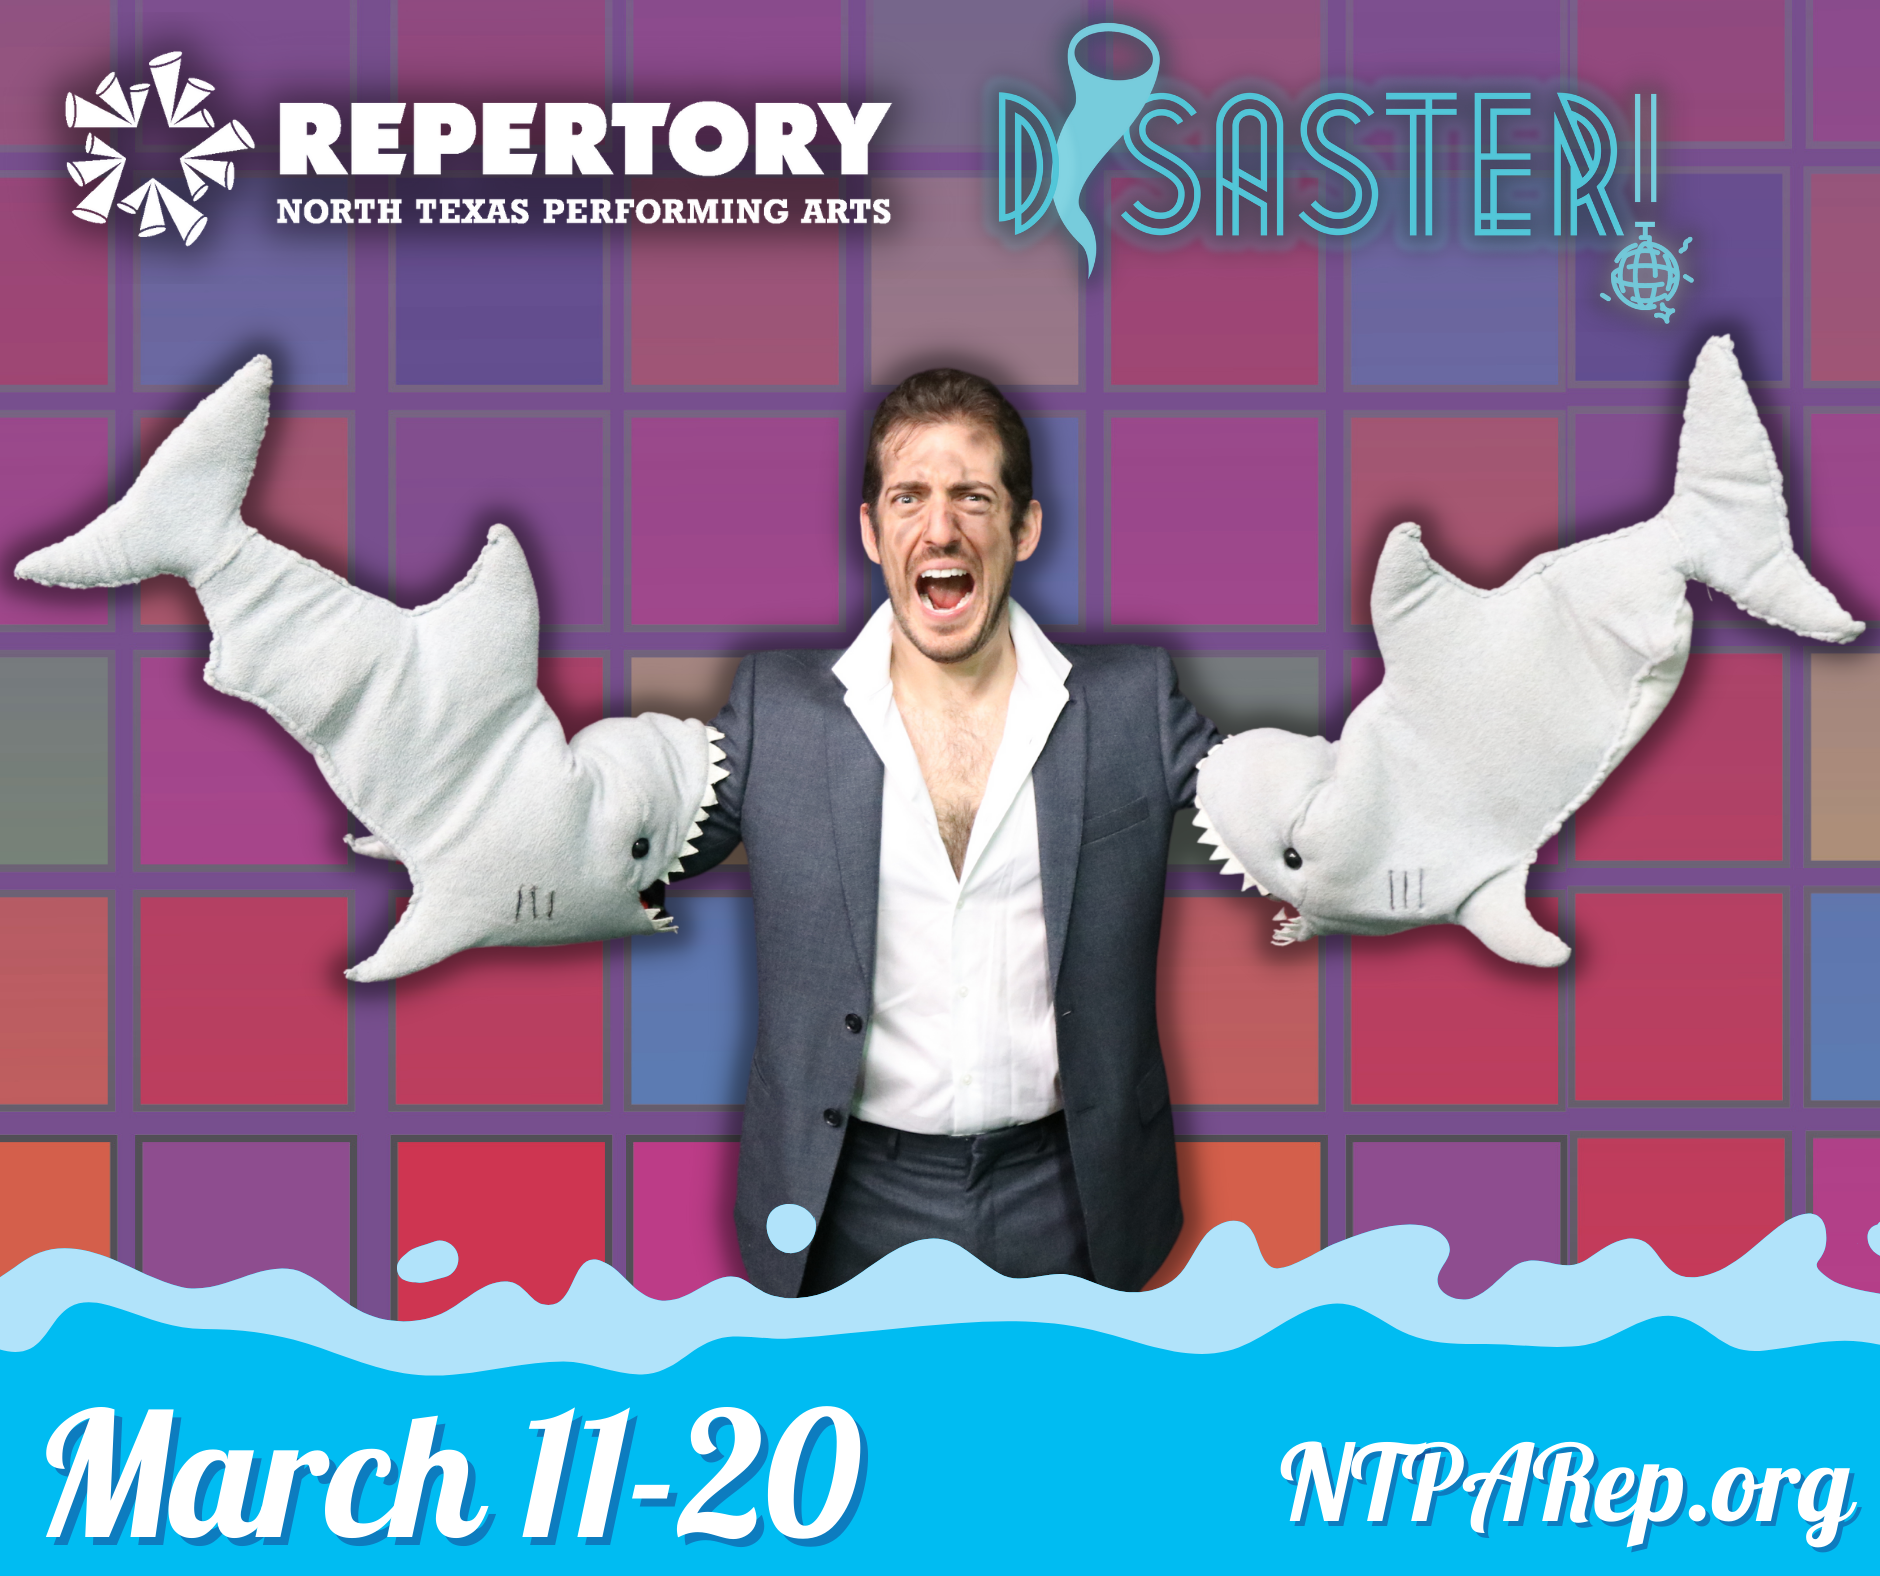 Disaster at the NTPA Repertory Theatre Featuring Adam Seirafi as Tony